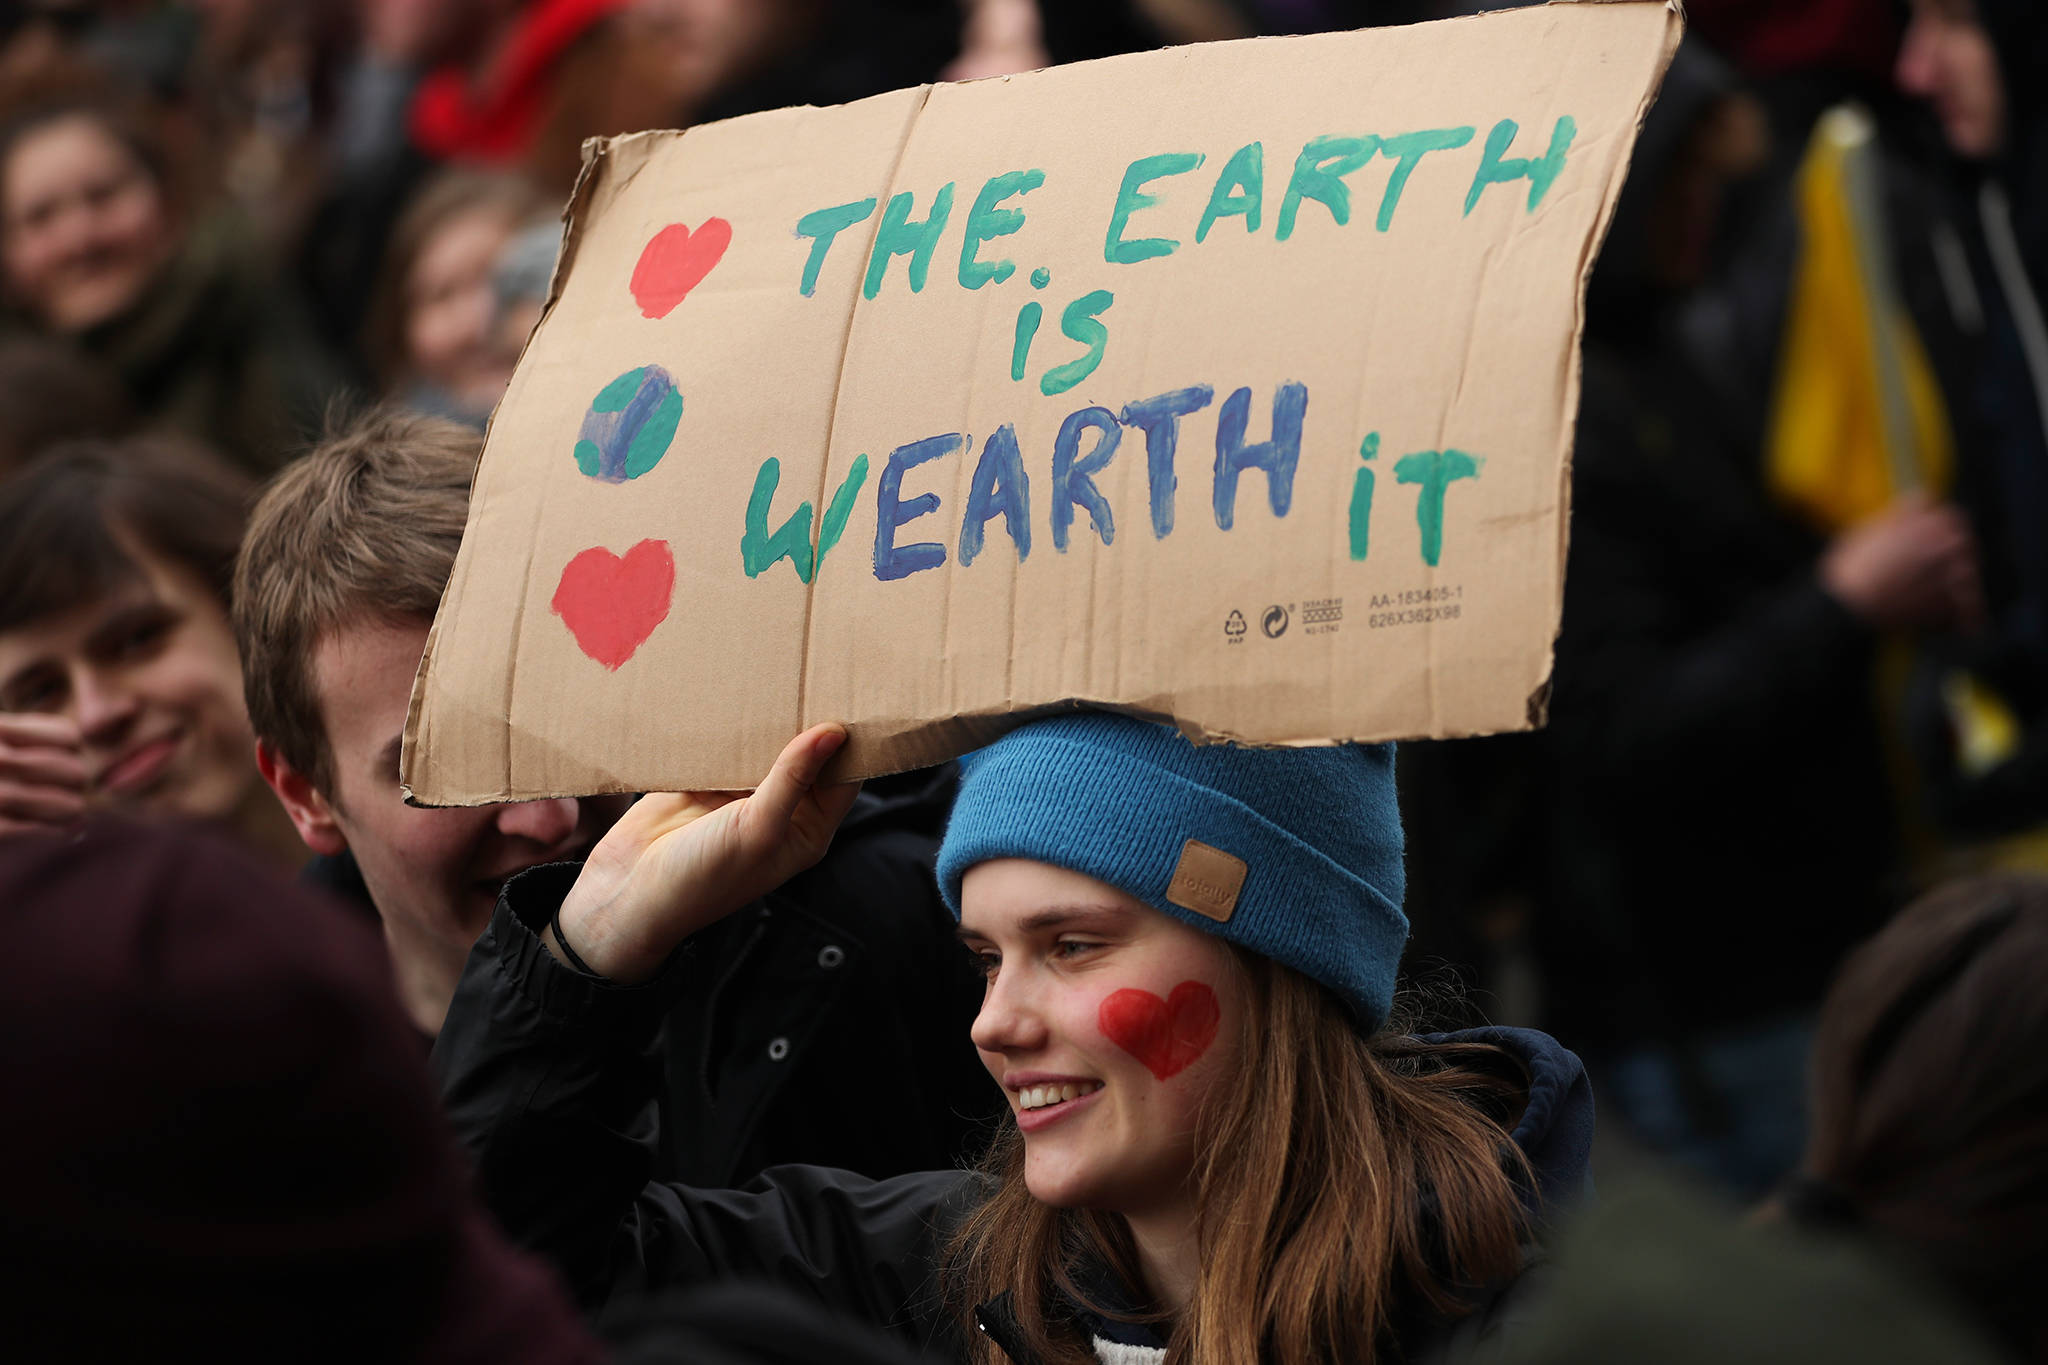 A young woman holds up a board as she marches with others during a climate change protest in Brussels, Thursday, Jan. 31, 2019. Thousands of teenagers in Belgium have skipped school for the fourth week in a row in an attempt to push authorities into providing better protection for the world’s climate. (AP Photo/Francisco Seco)